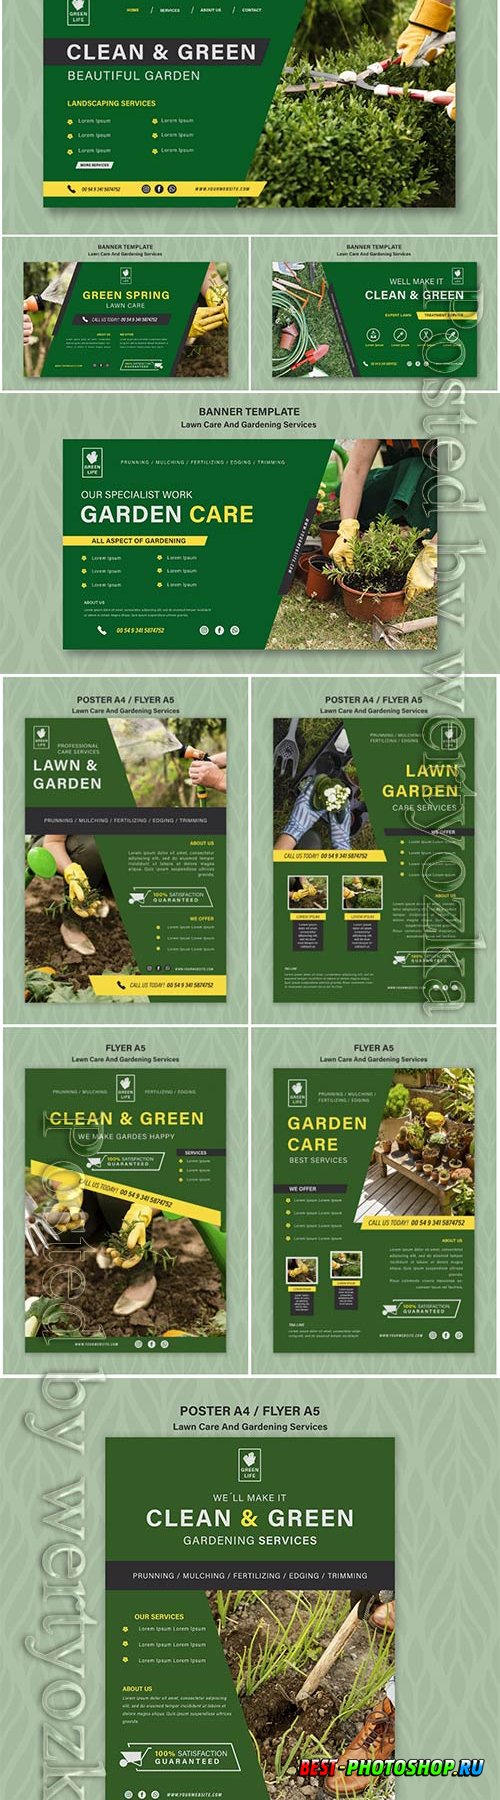 Lawn care concept banner template